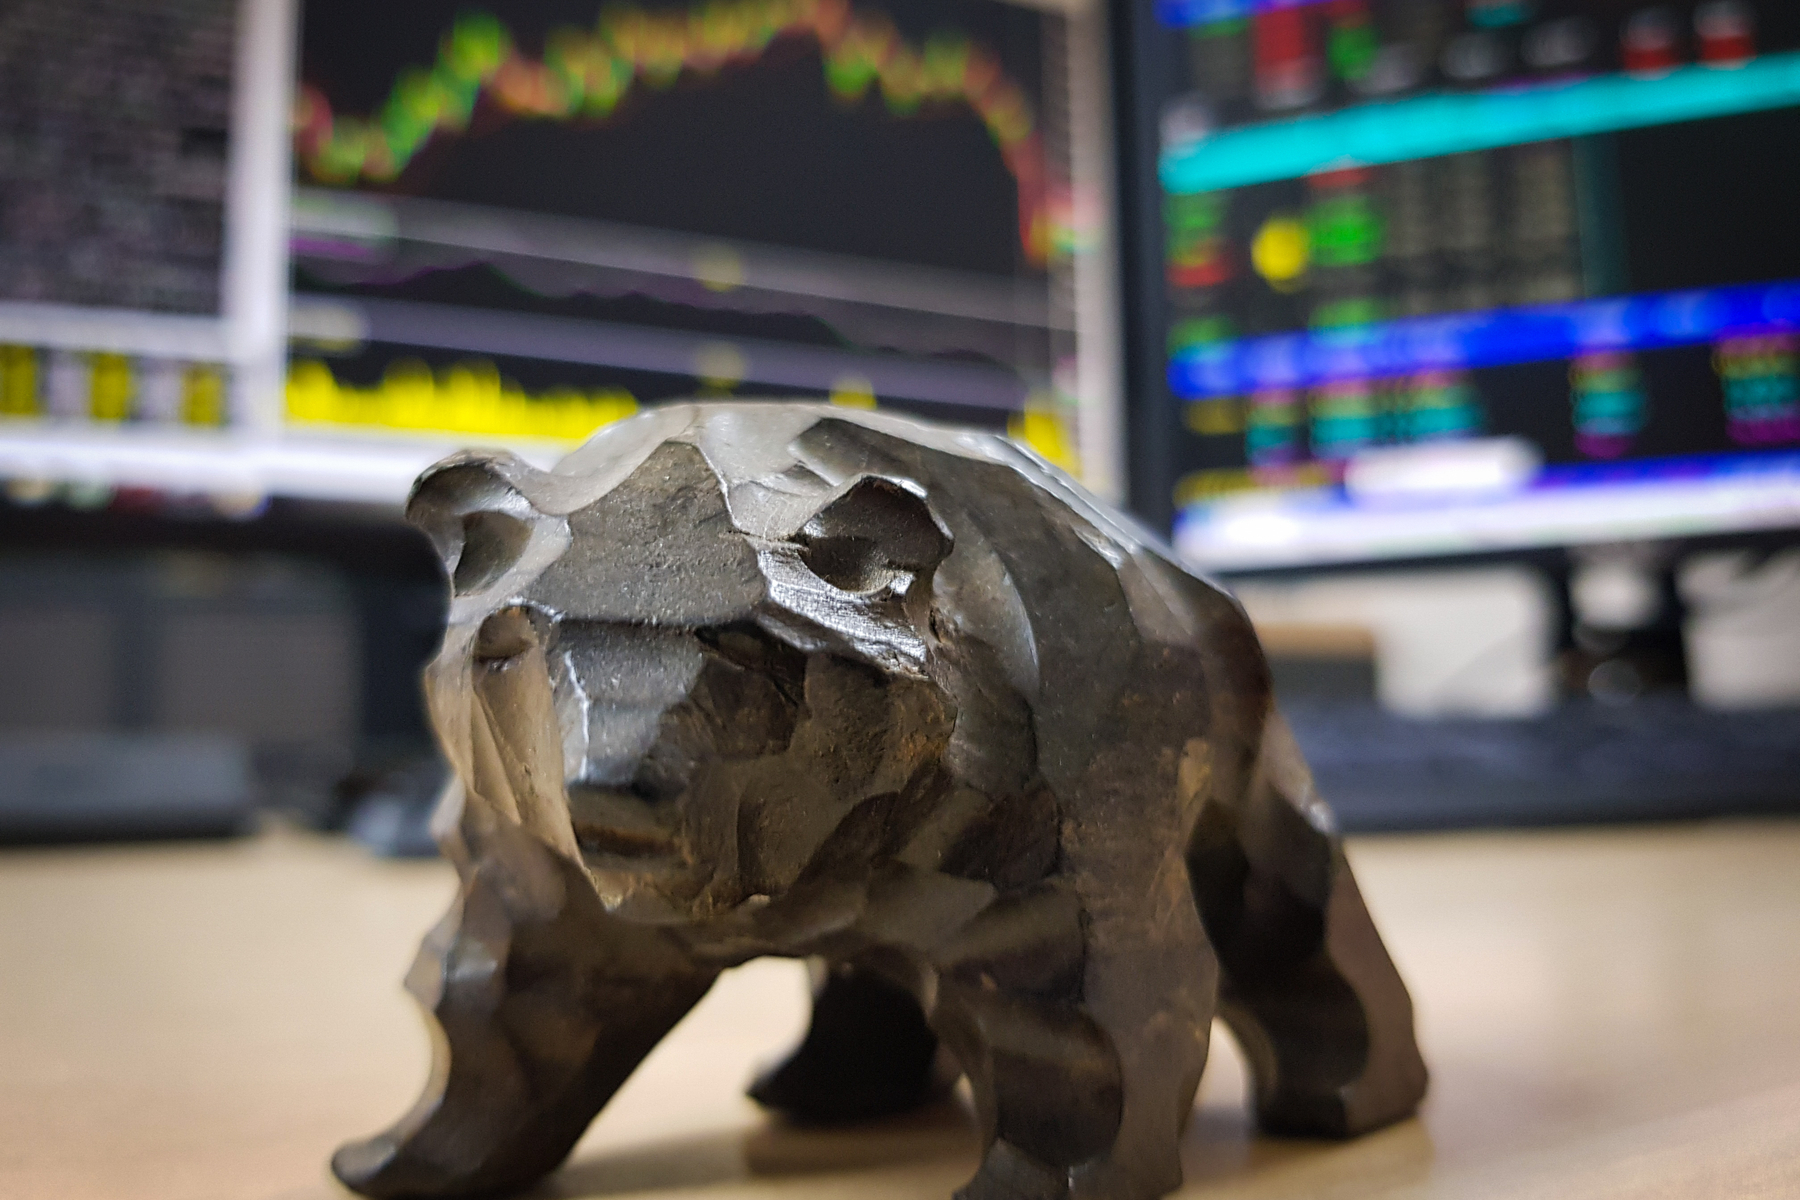 a figurine of a bear in front of investment graphs